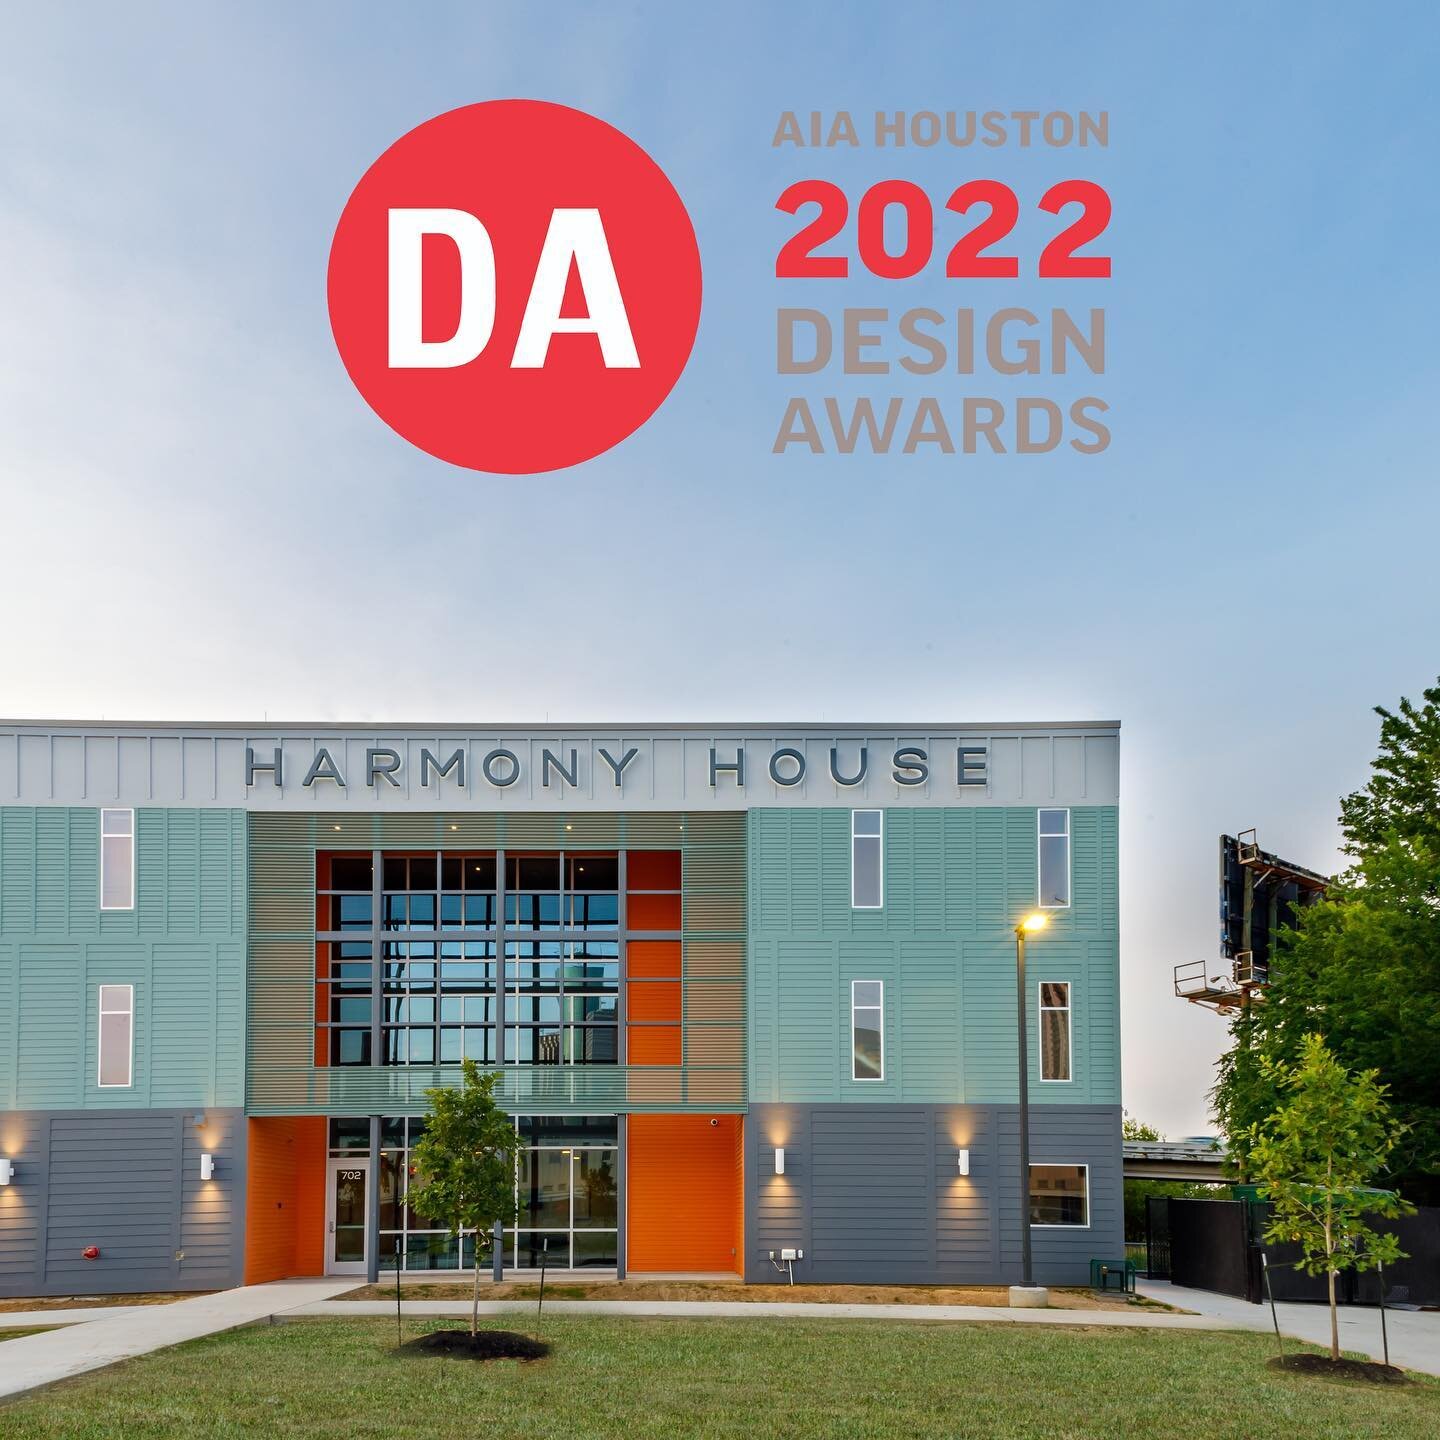 Our latest project is now an AIA Houston 2022 Design Award winner! Congratulations to a great team!
#aiahoustondesignawards  #houstonaffordablehousing  #HarmonyHouseHouston